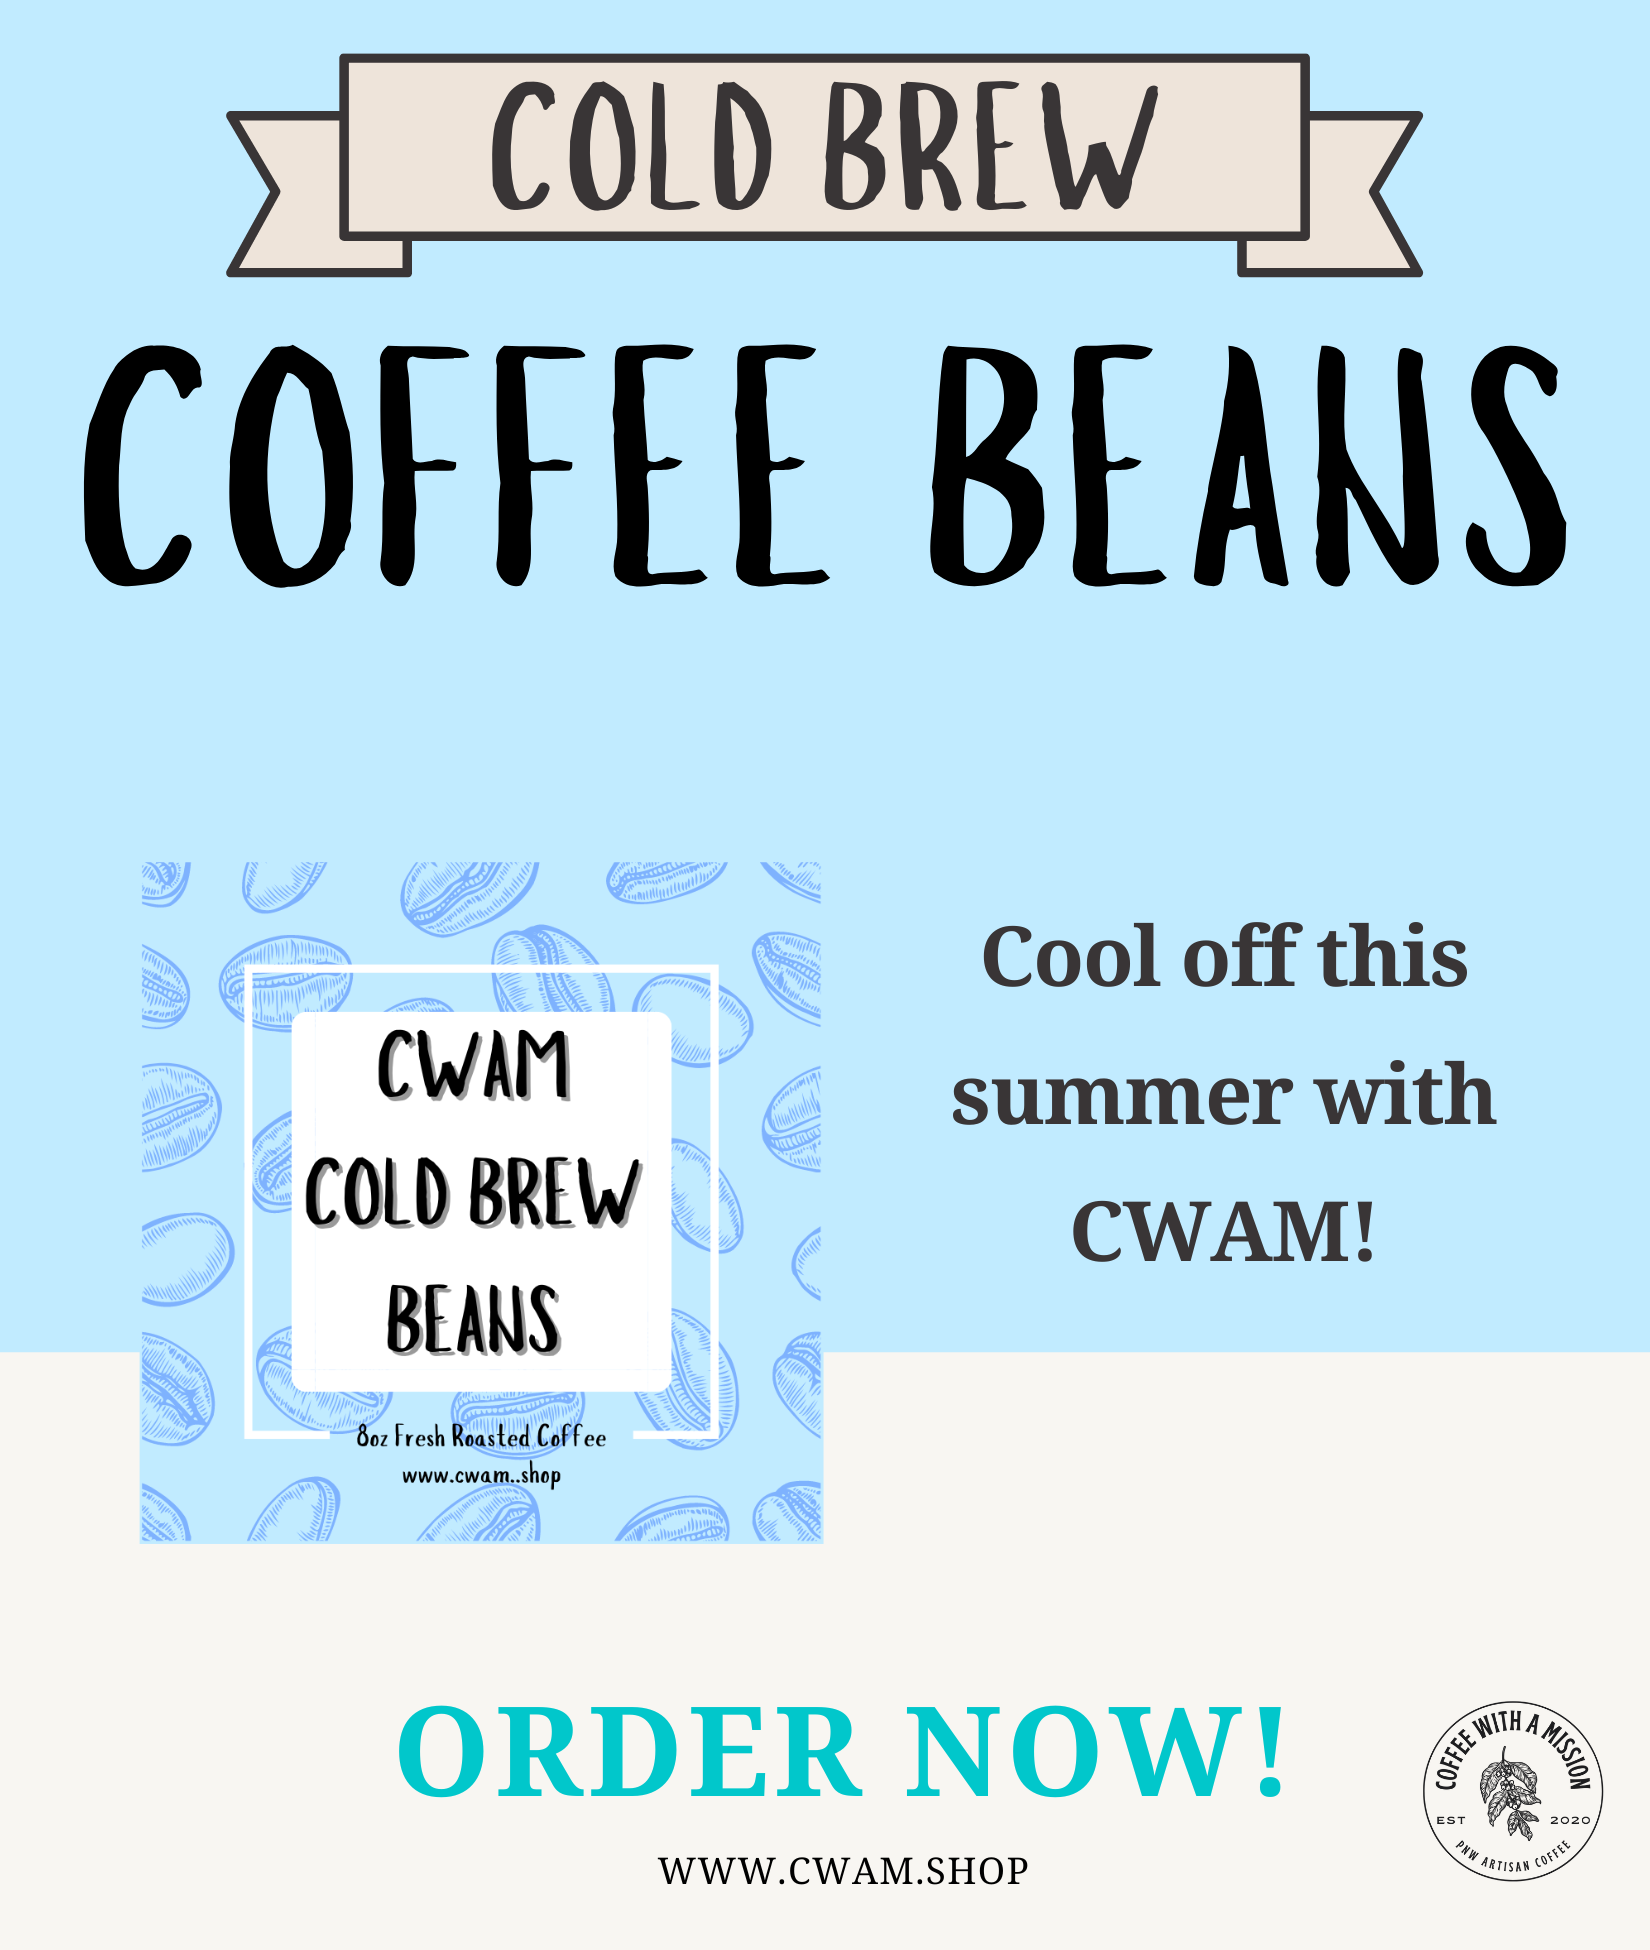 COLD BREW BEANS